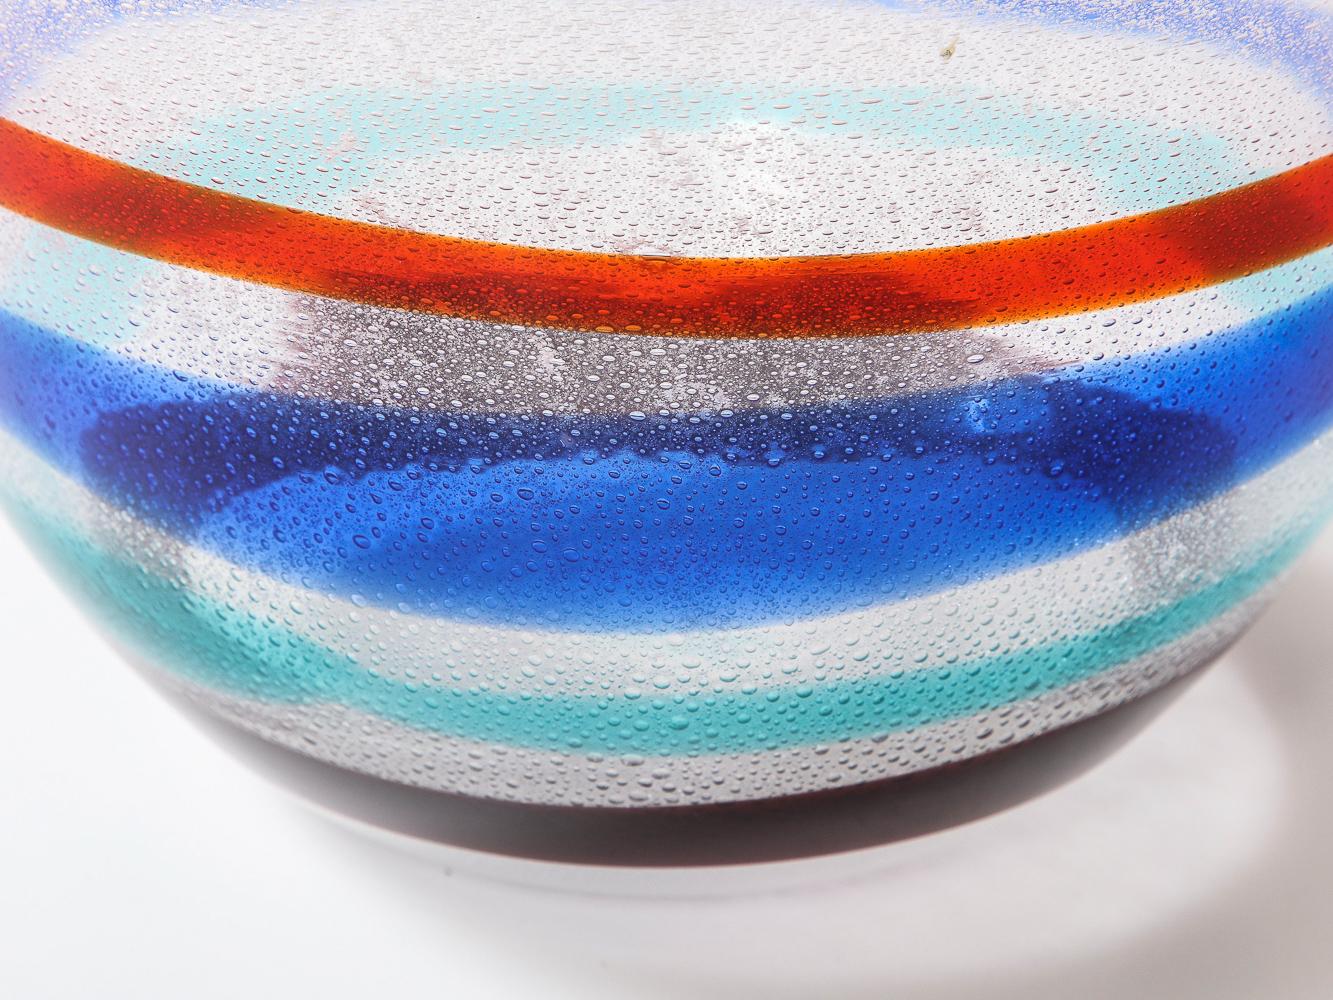 Clear & colored blown glass. Great scale with internal bubbles and vibrant color stripes. Signed on underside by maker.